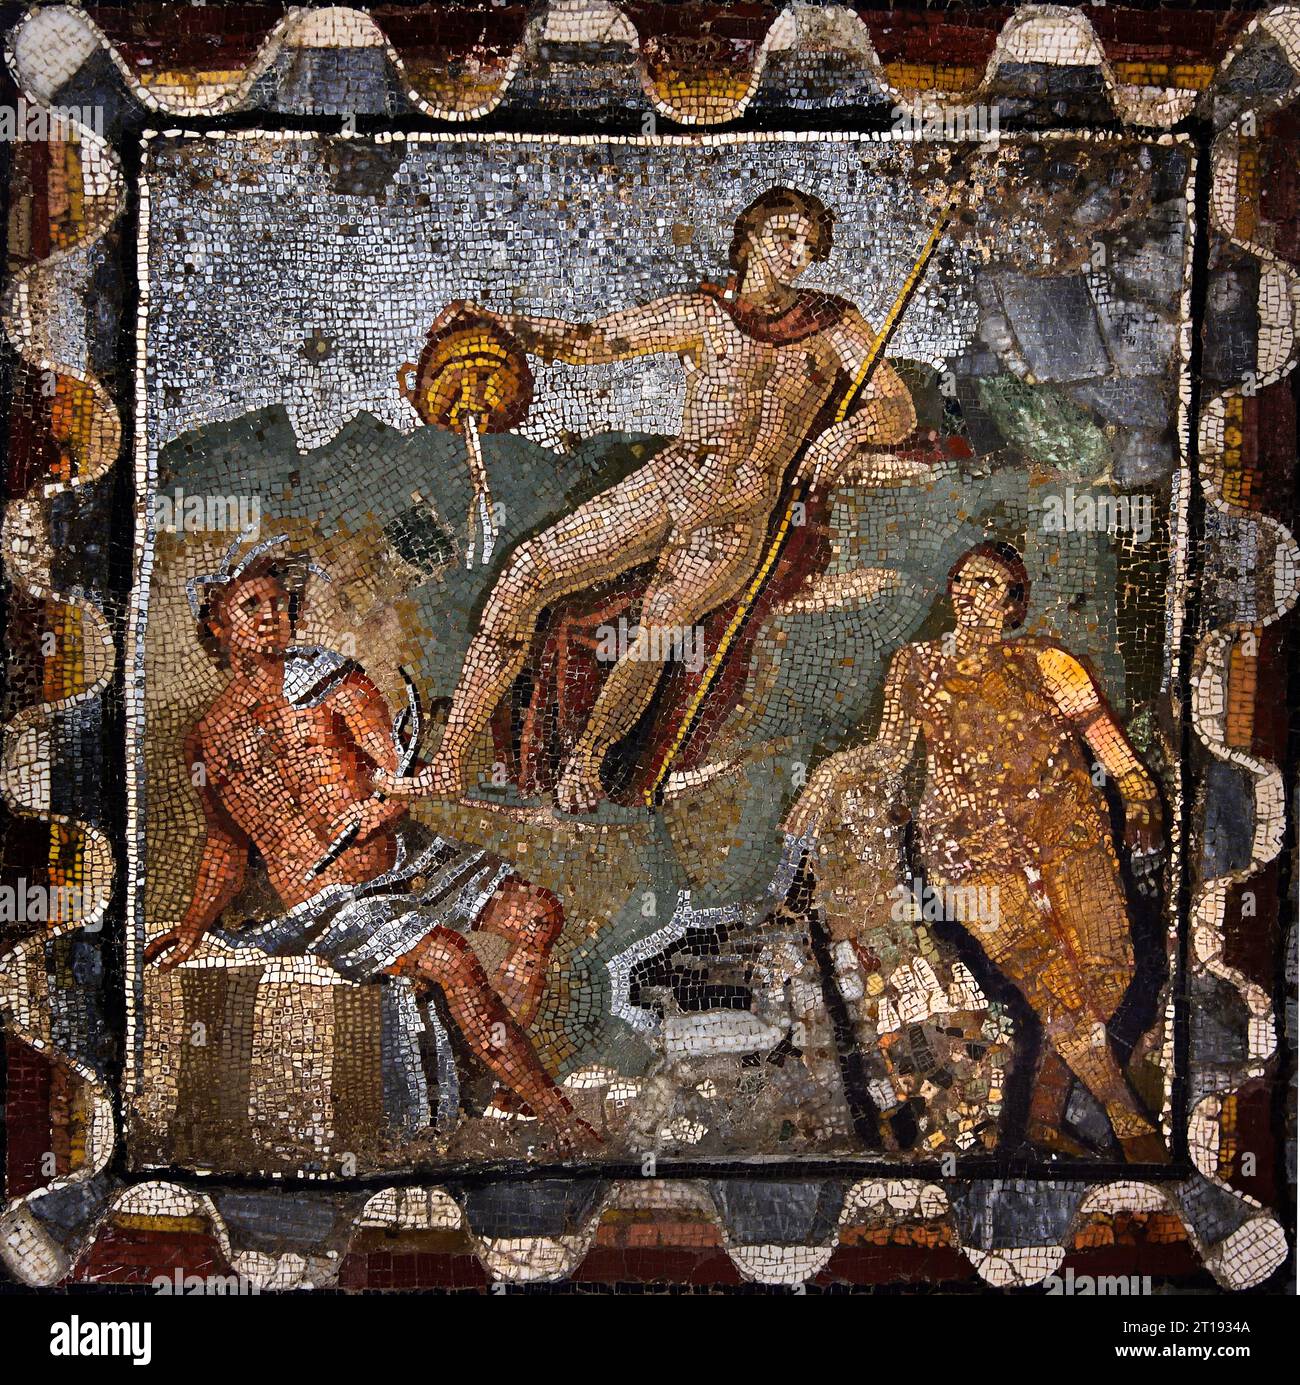 Group of mountain and water gods, mosaic from Pompeii Roman City is located near Naples in the Campania region of Italy. Pompeii was buried under 4-6 m of volcanic ash and pumice in the eruption of Mount Vesuvius in AD 79. Italy, Museum, Naples, Stock Photo